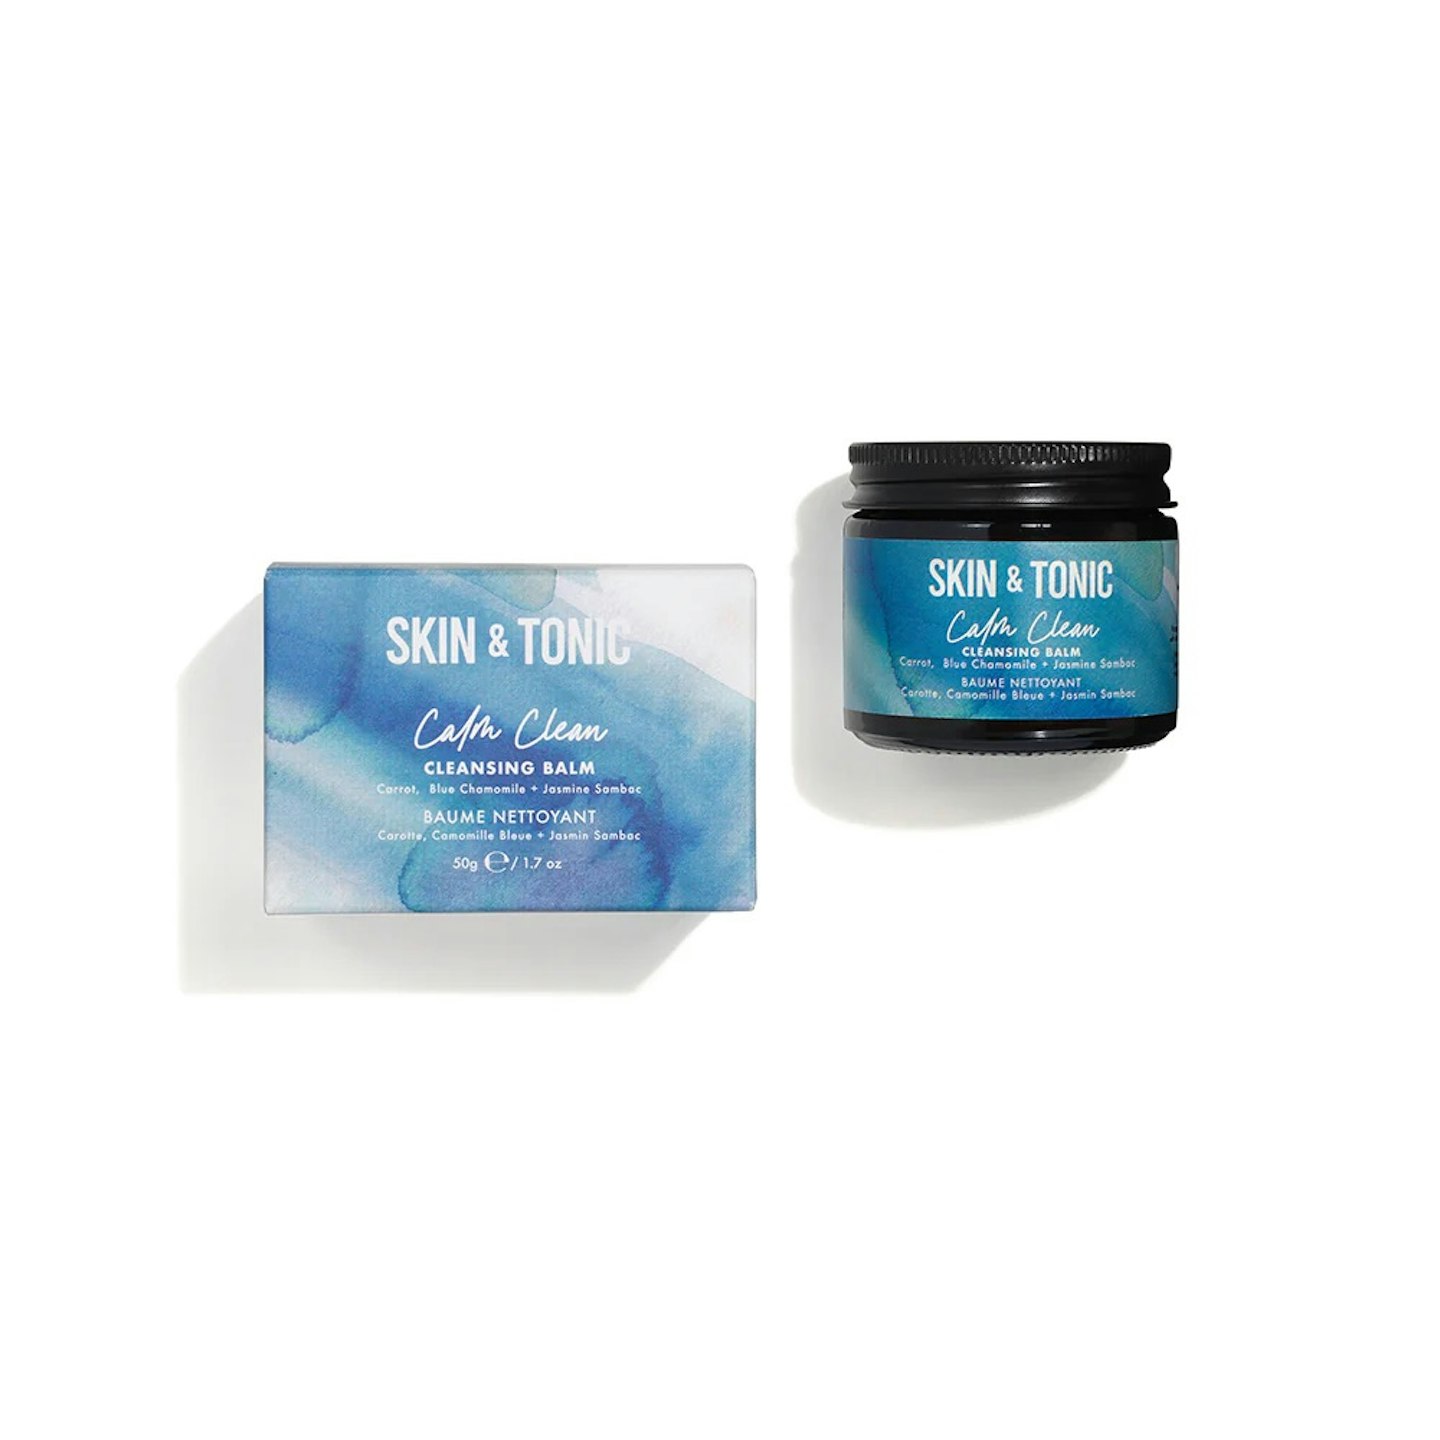 Skin and Tonic Steam Calm Clean Cleansing Balm